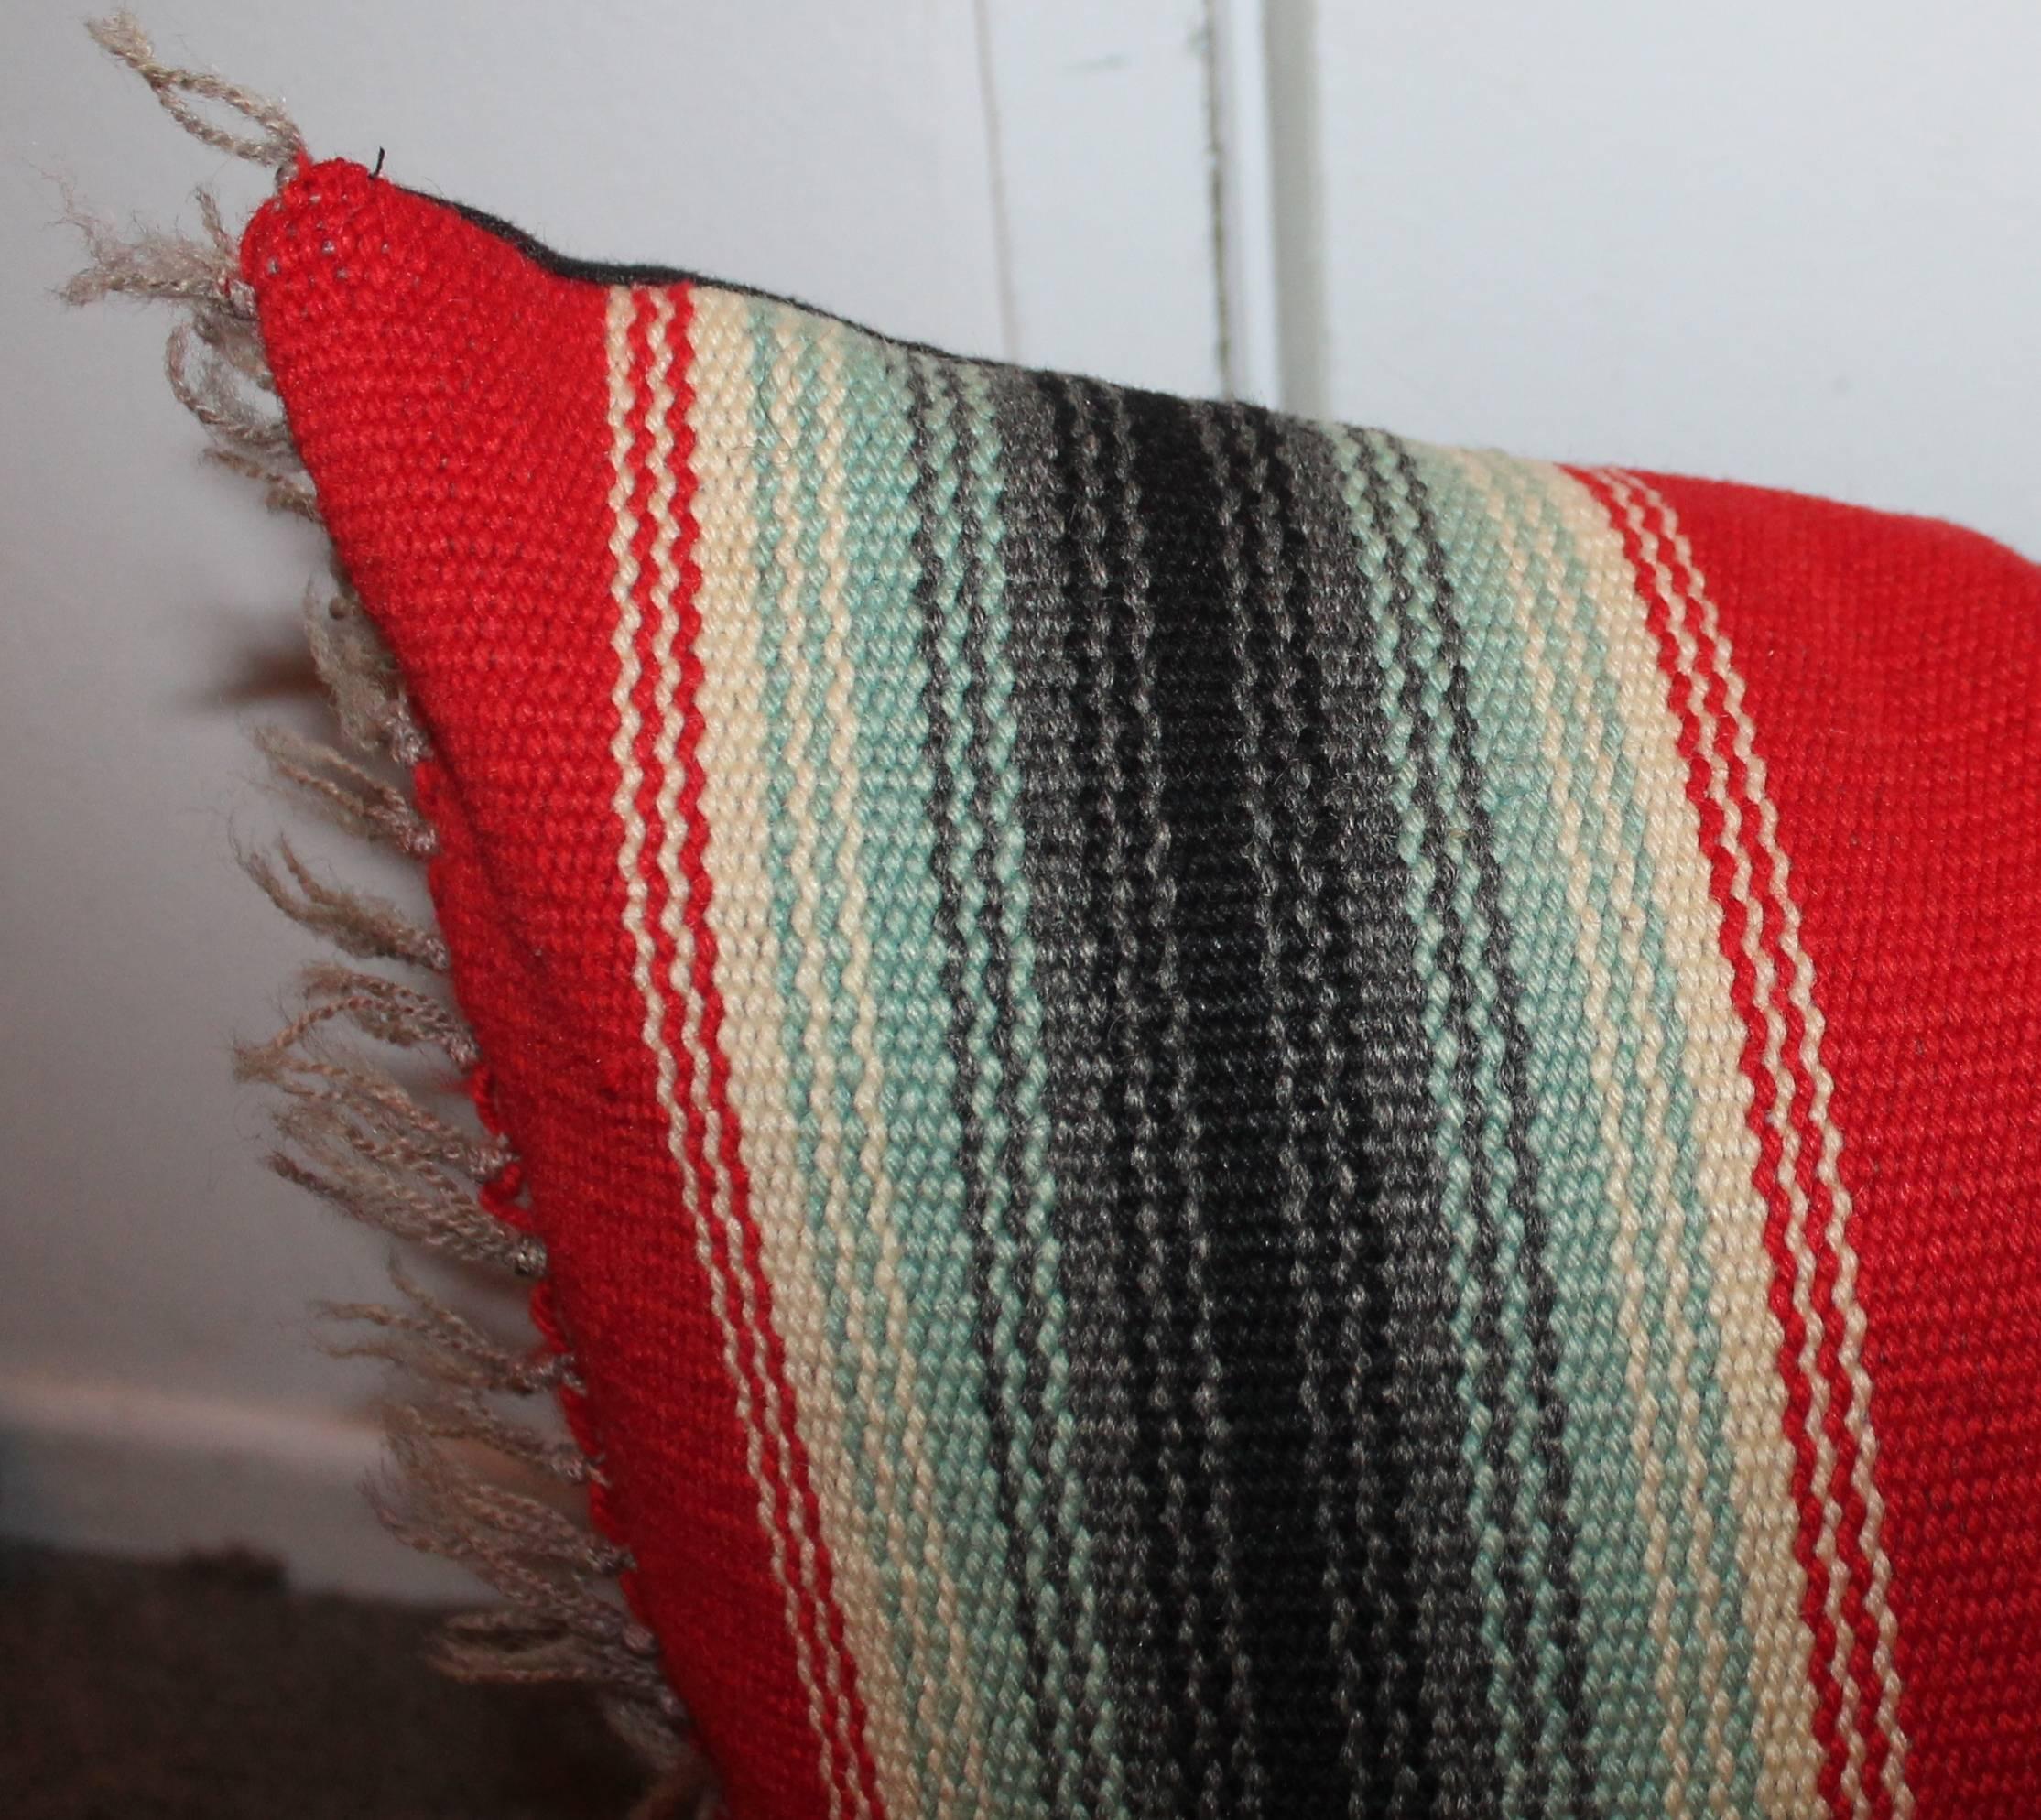 Hand-Woven Amazing Mexican or American Indian Serape Square Pillows